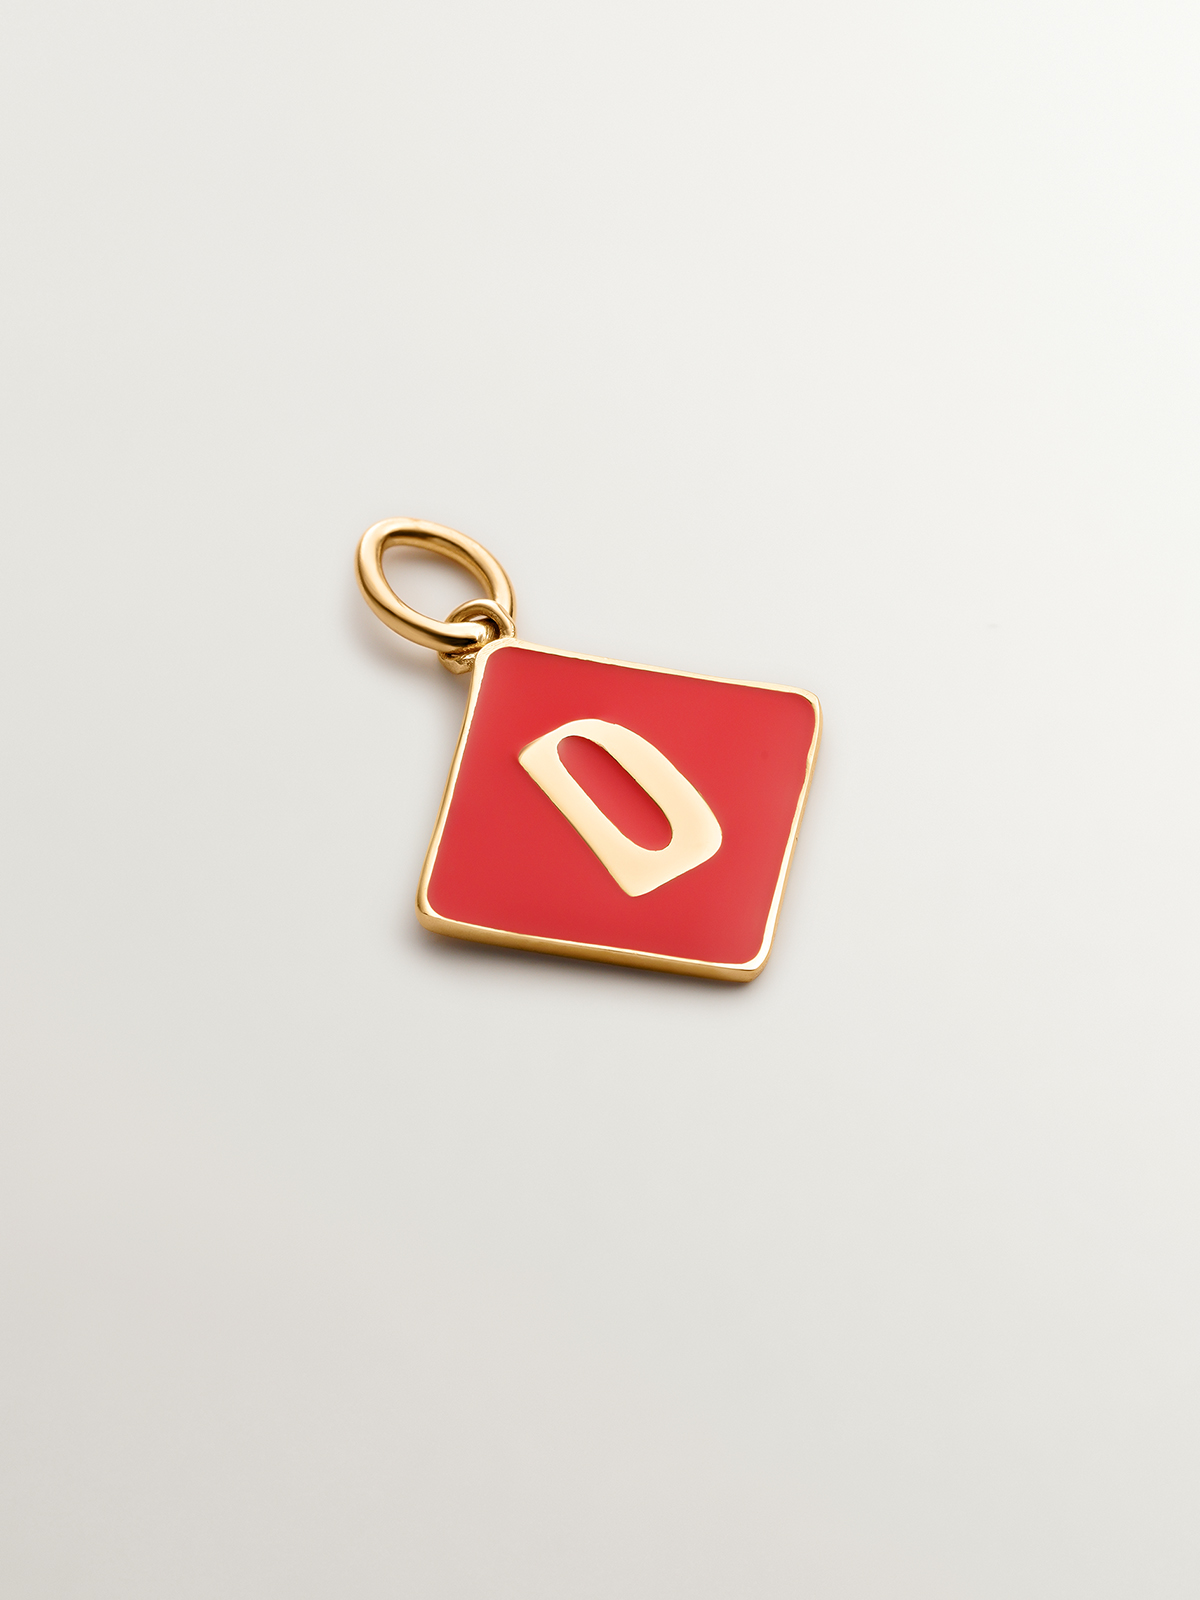 18K yellow gold plated 925 sterling silver charm with initial D and red enamel in diamond shape